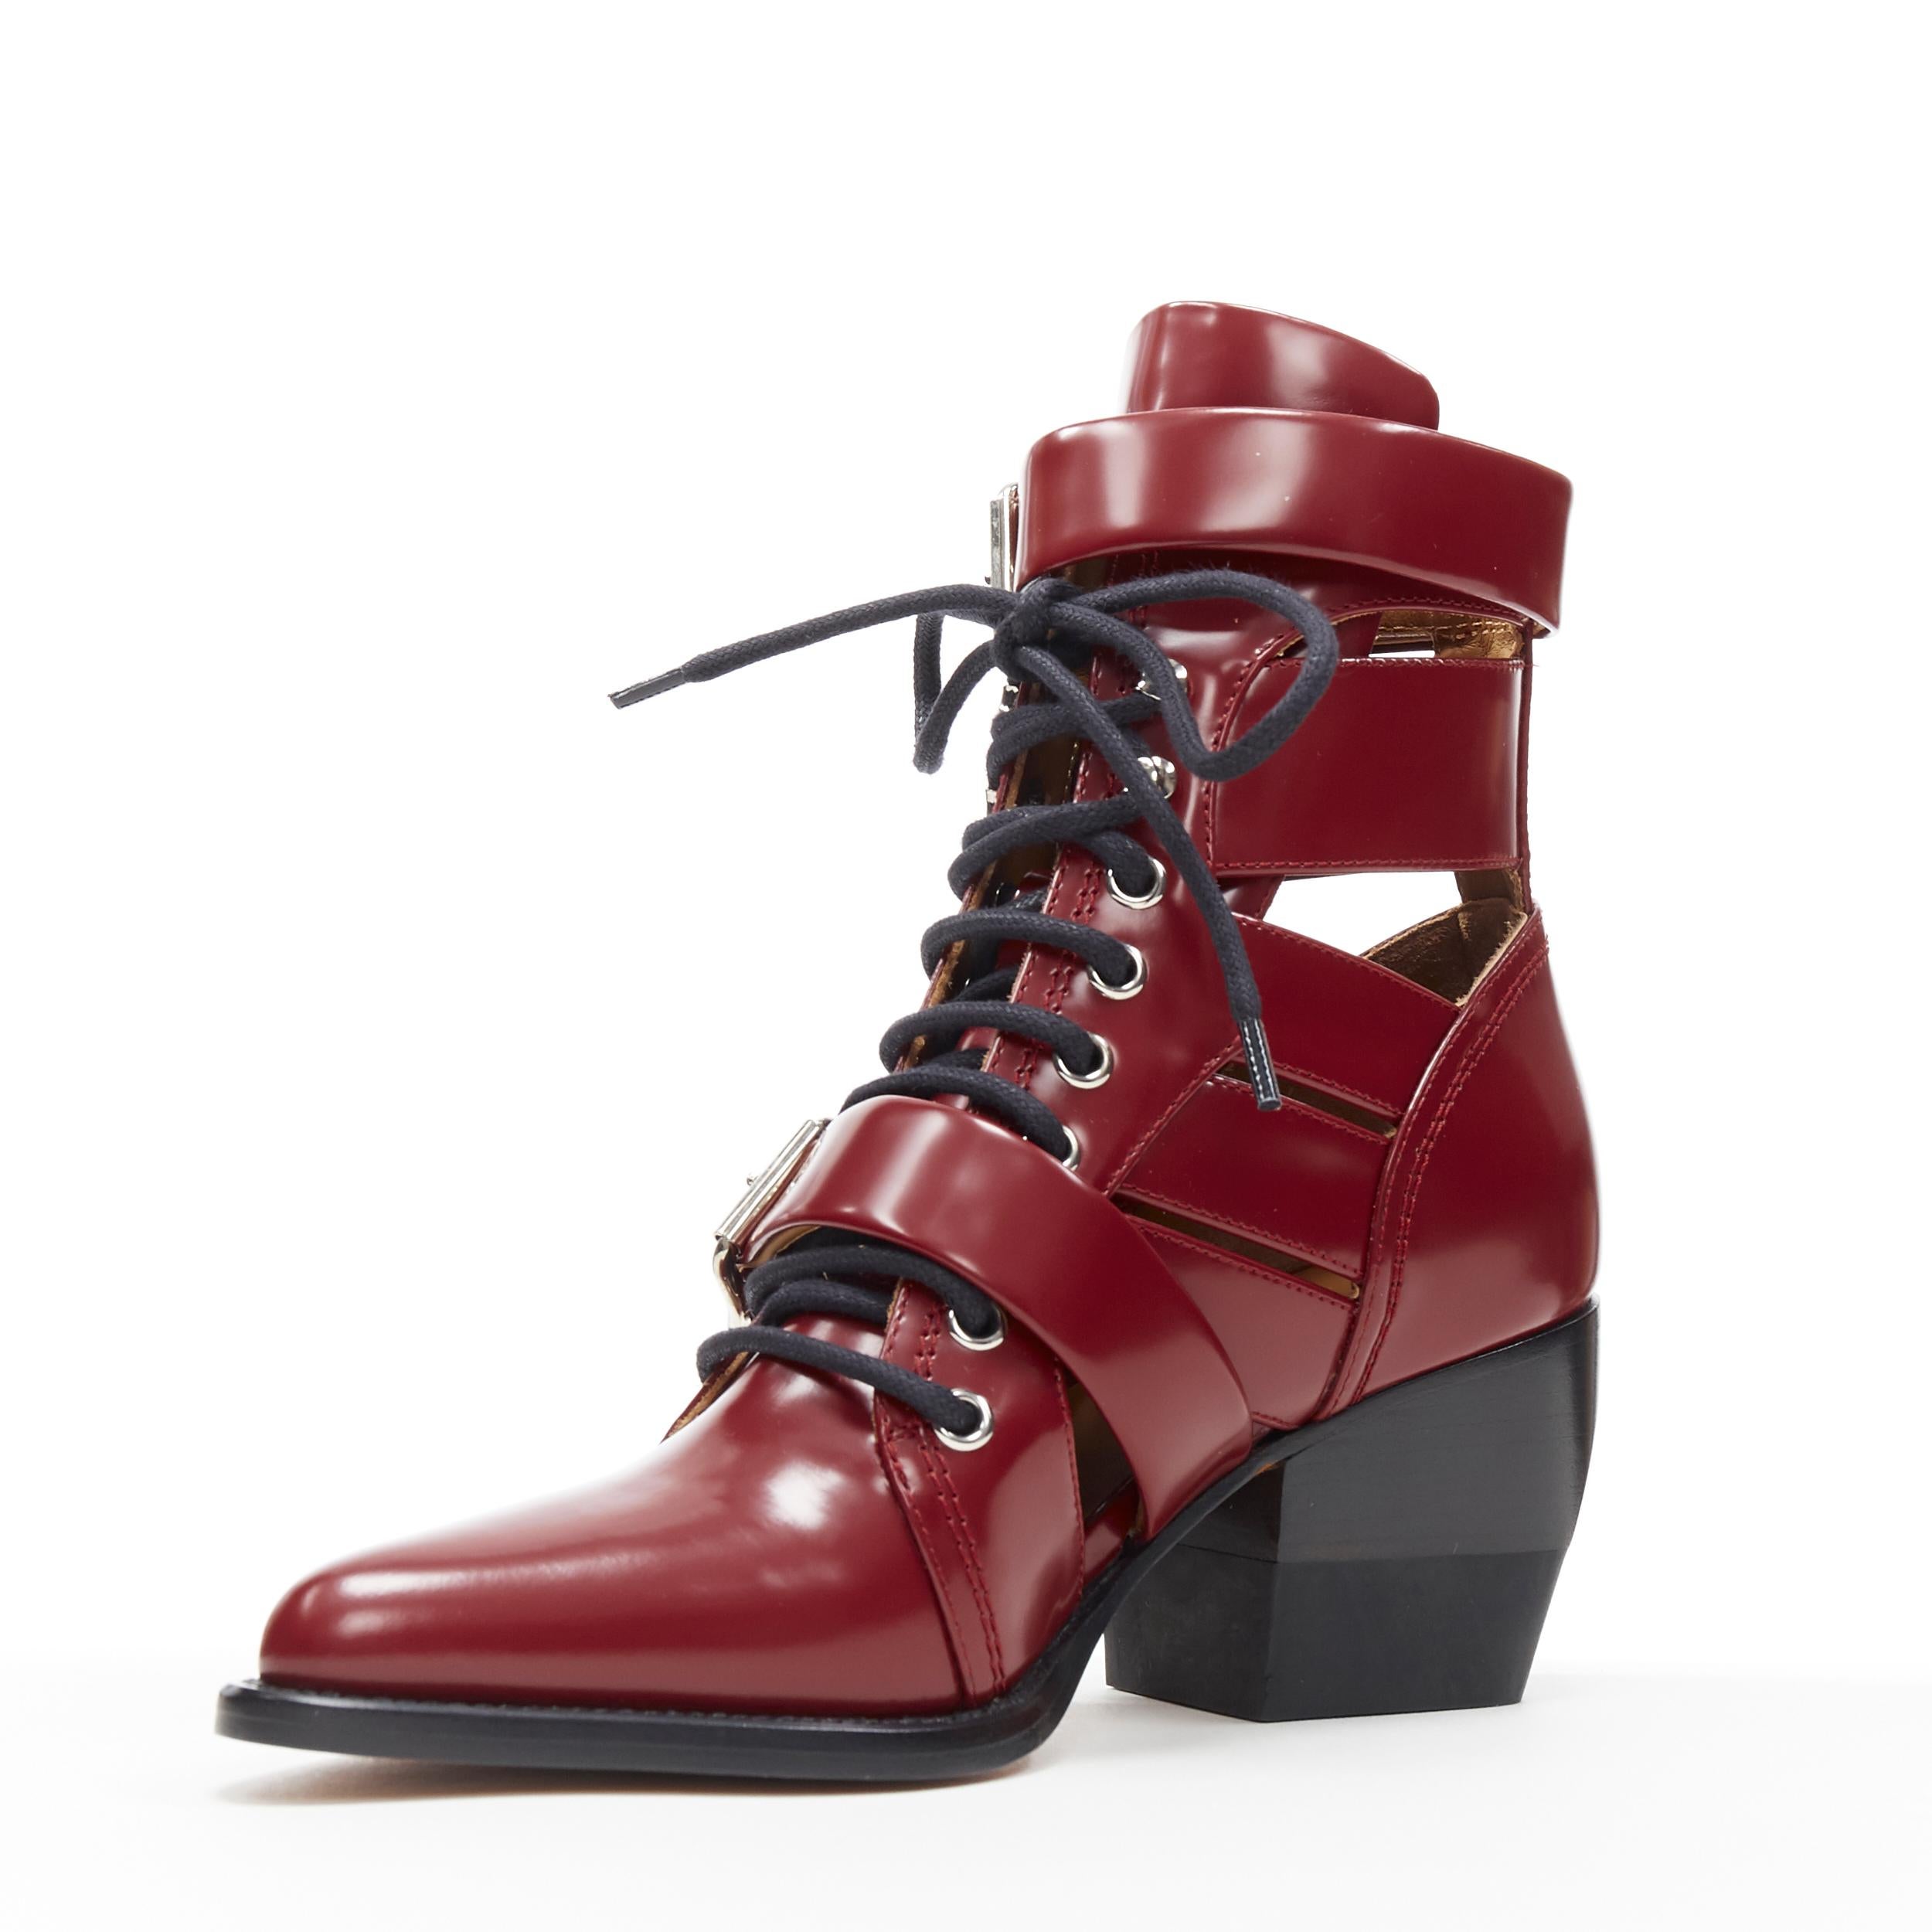 Red new CHLOE Rylee burgundy red leather cut out buckled pointy ankle boot EU38.5